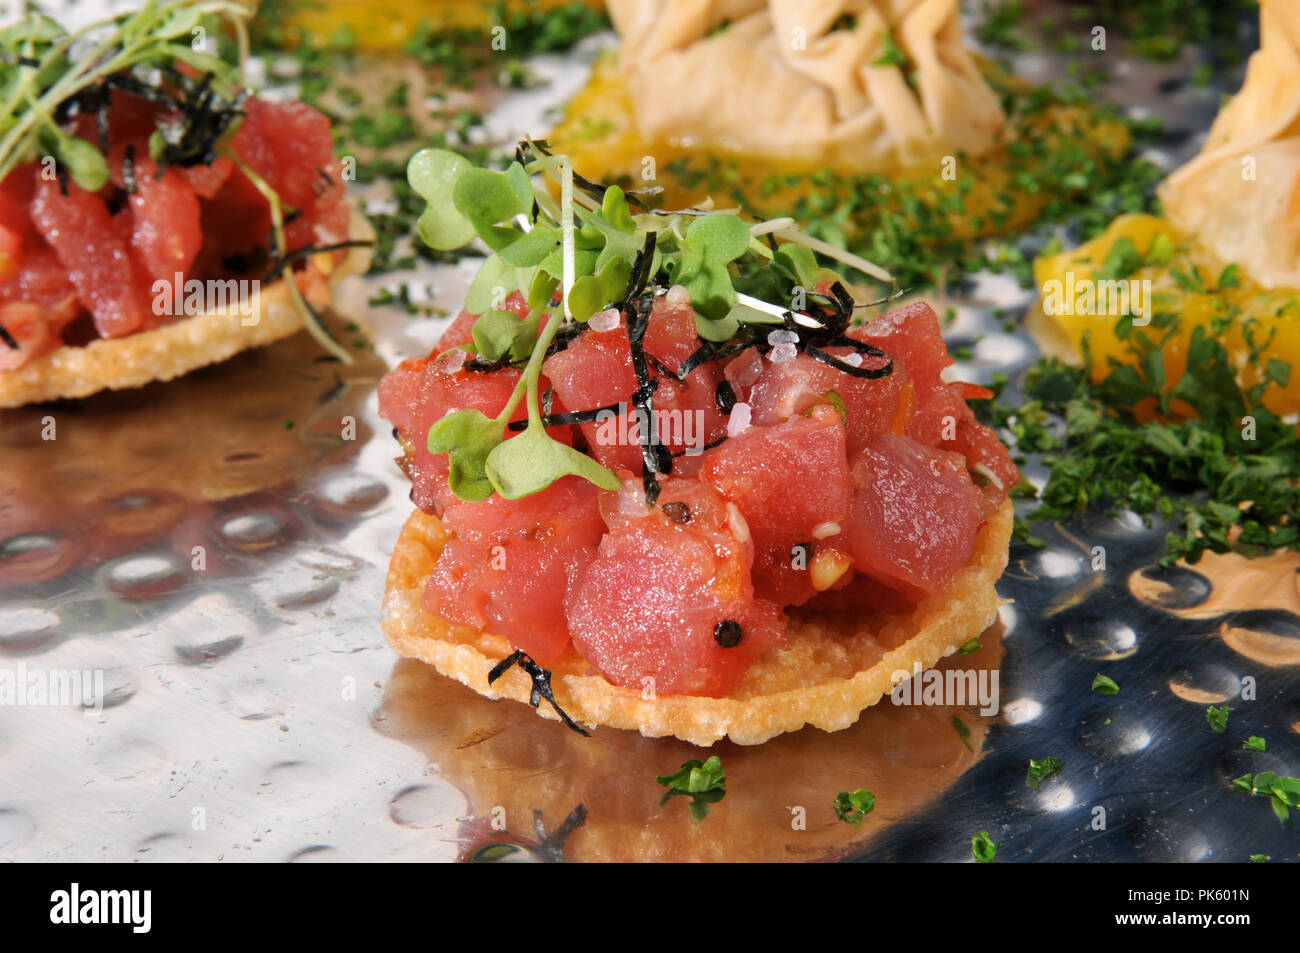 a party tray of appetizers, available as a royalty free food stock photo Stock Photo